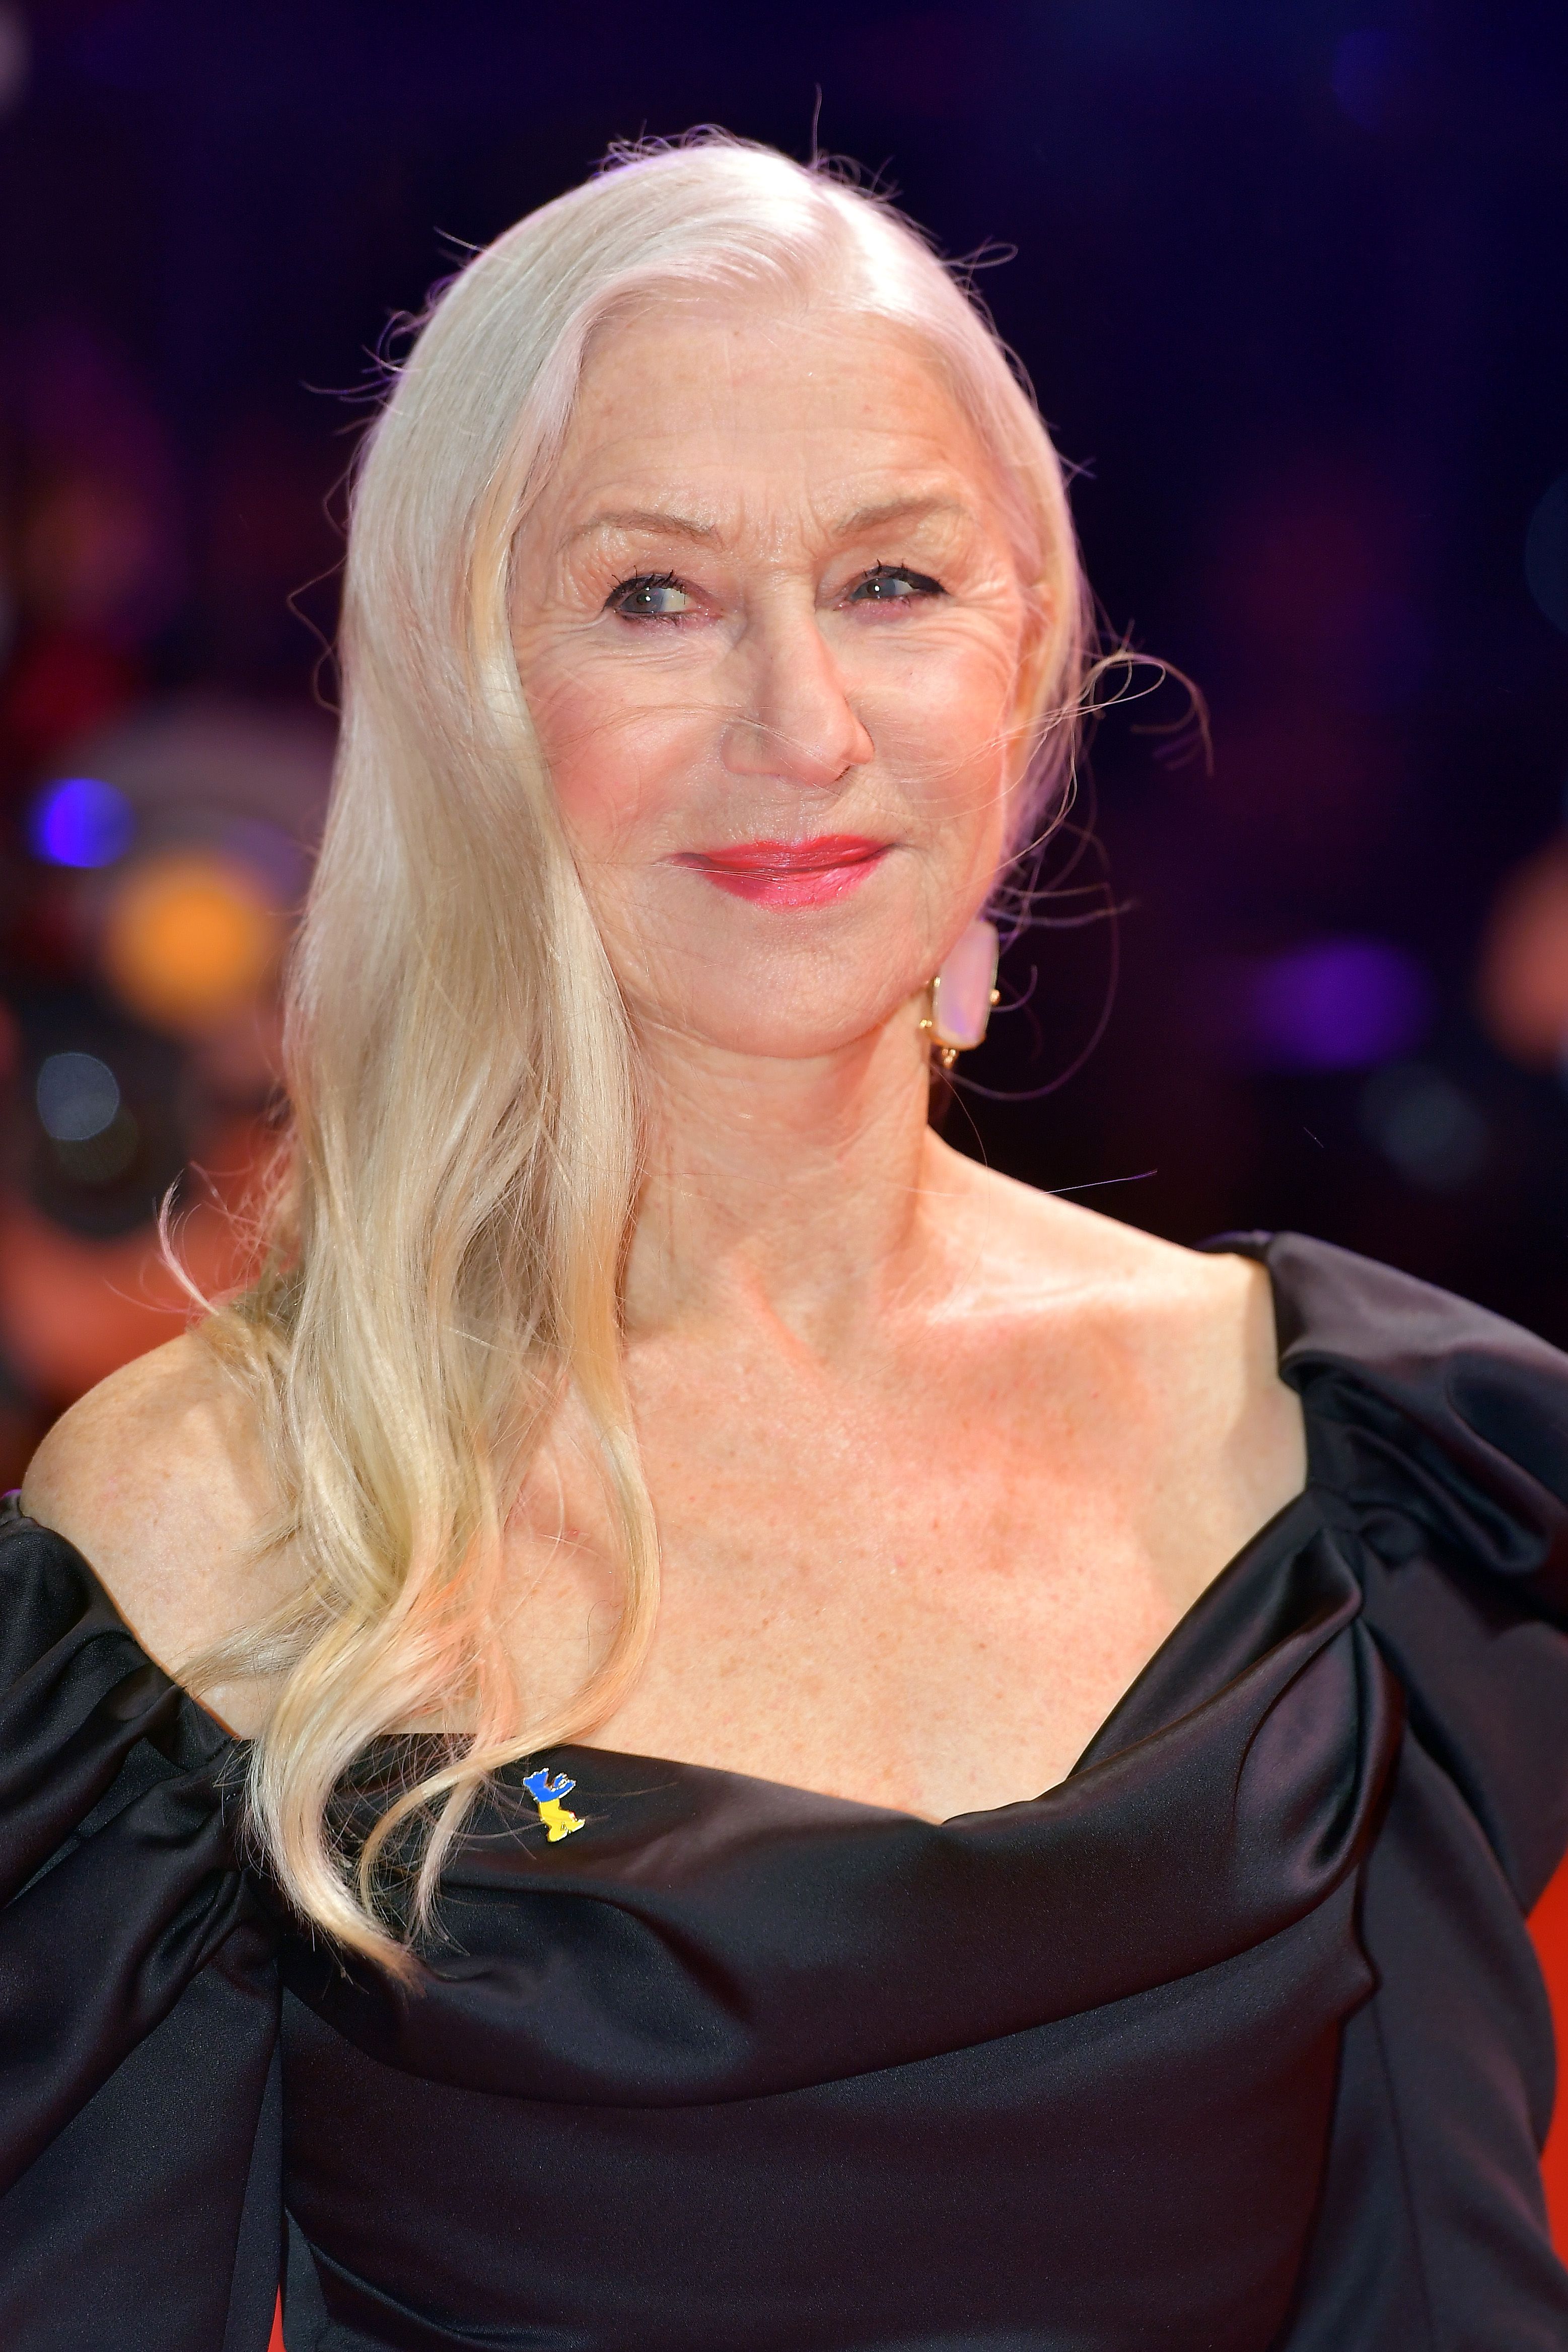 Helen Mirren, 77, Gives Cheeky Response to Being Called a Nudist